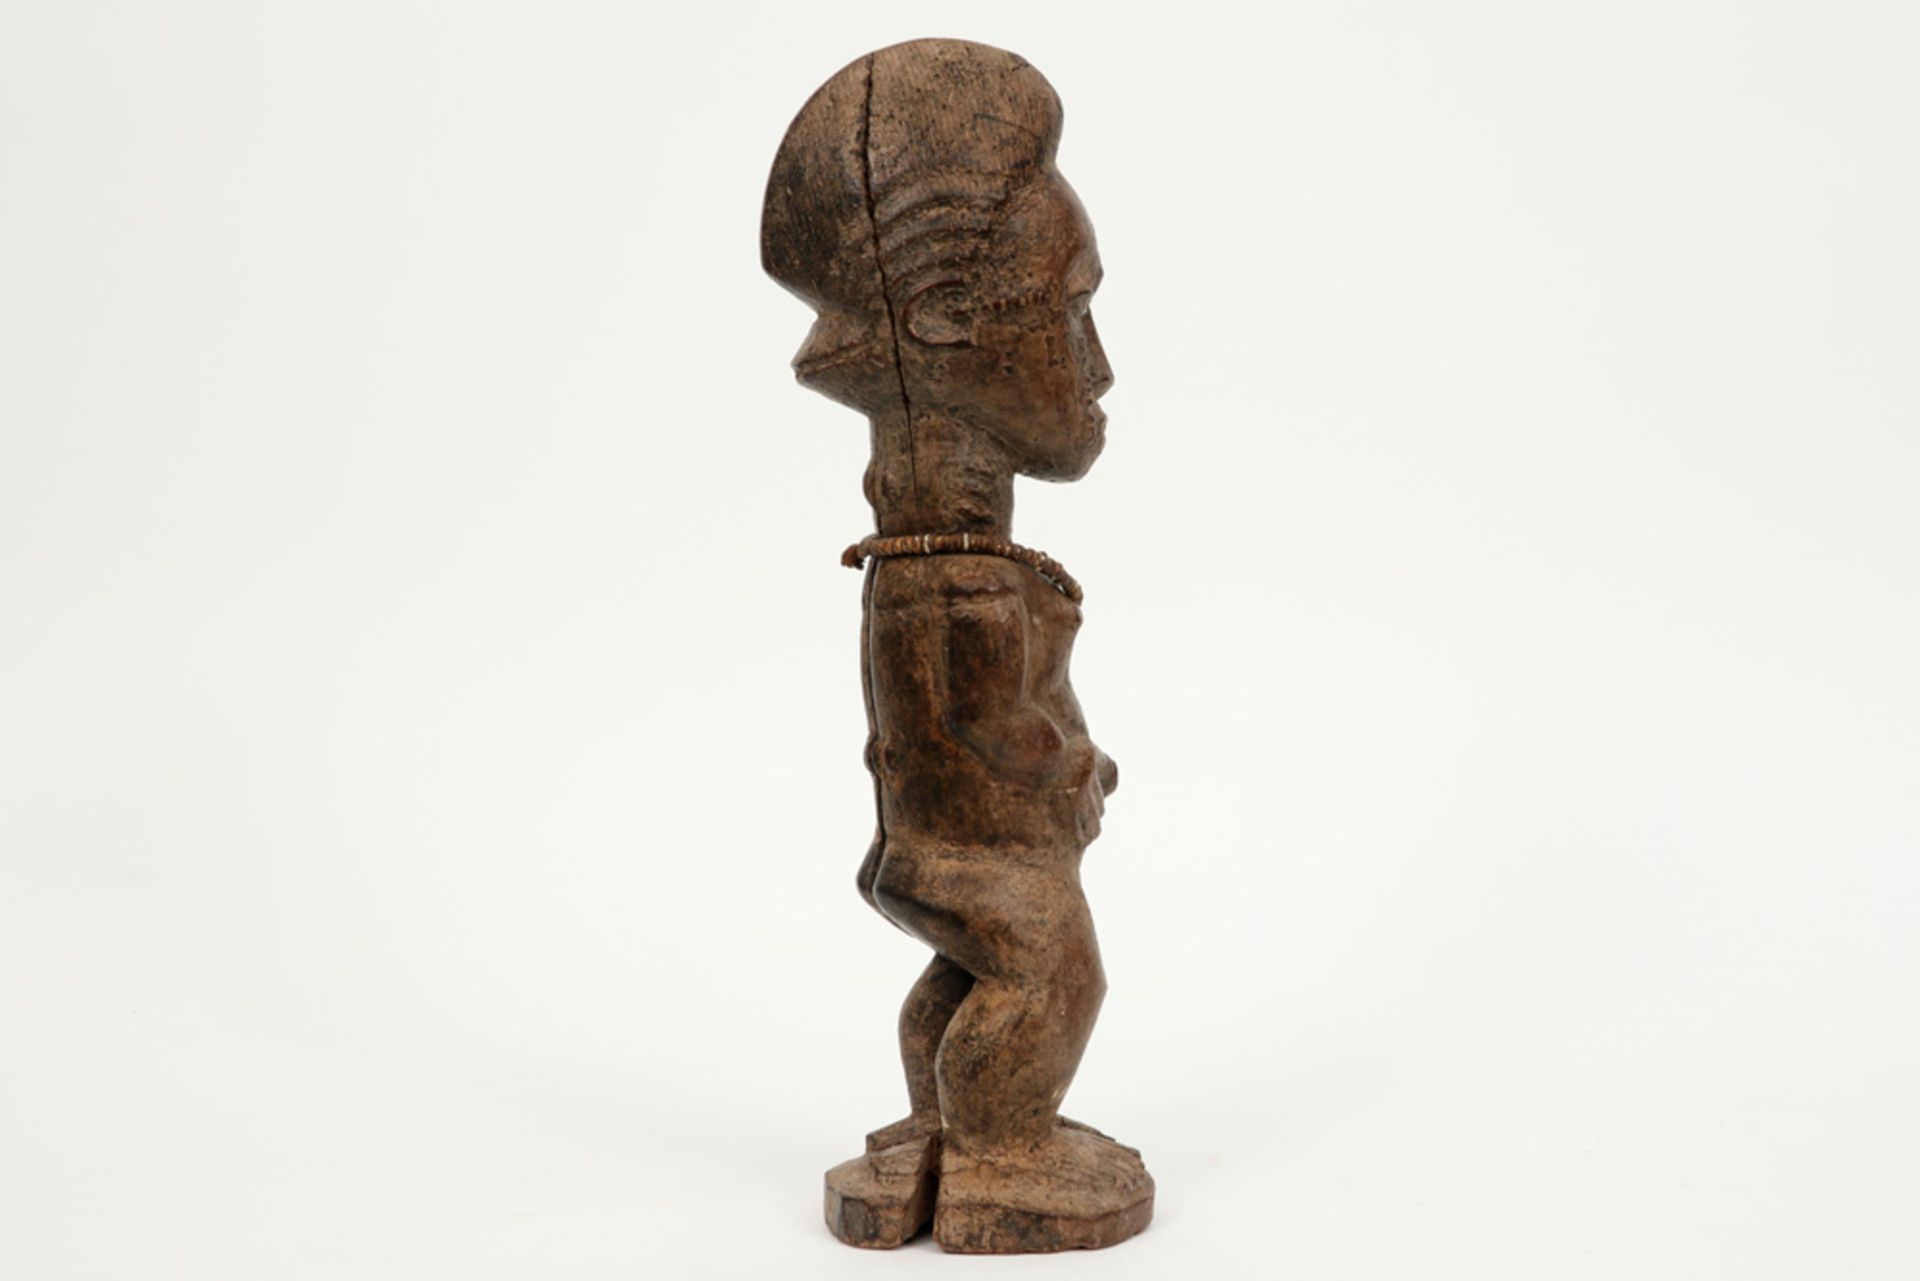 authentic Ivory Coast Baule ancestral sculpture in wood with fine carvings - Image 2 of 4